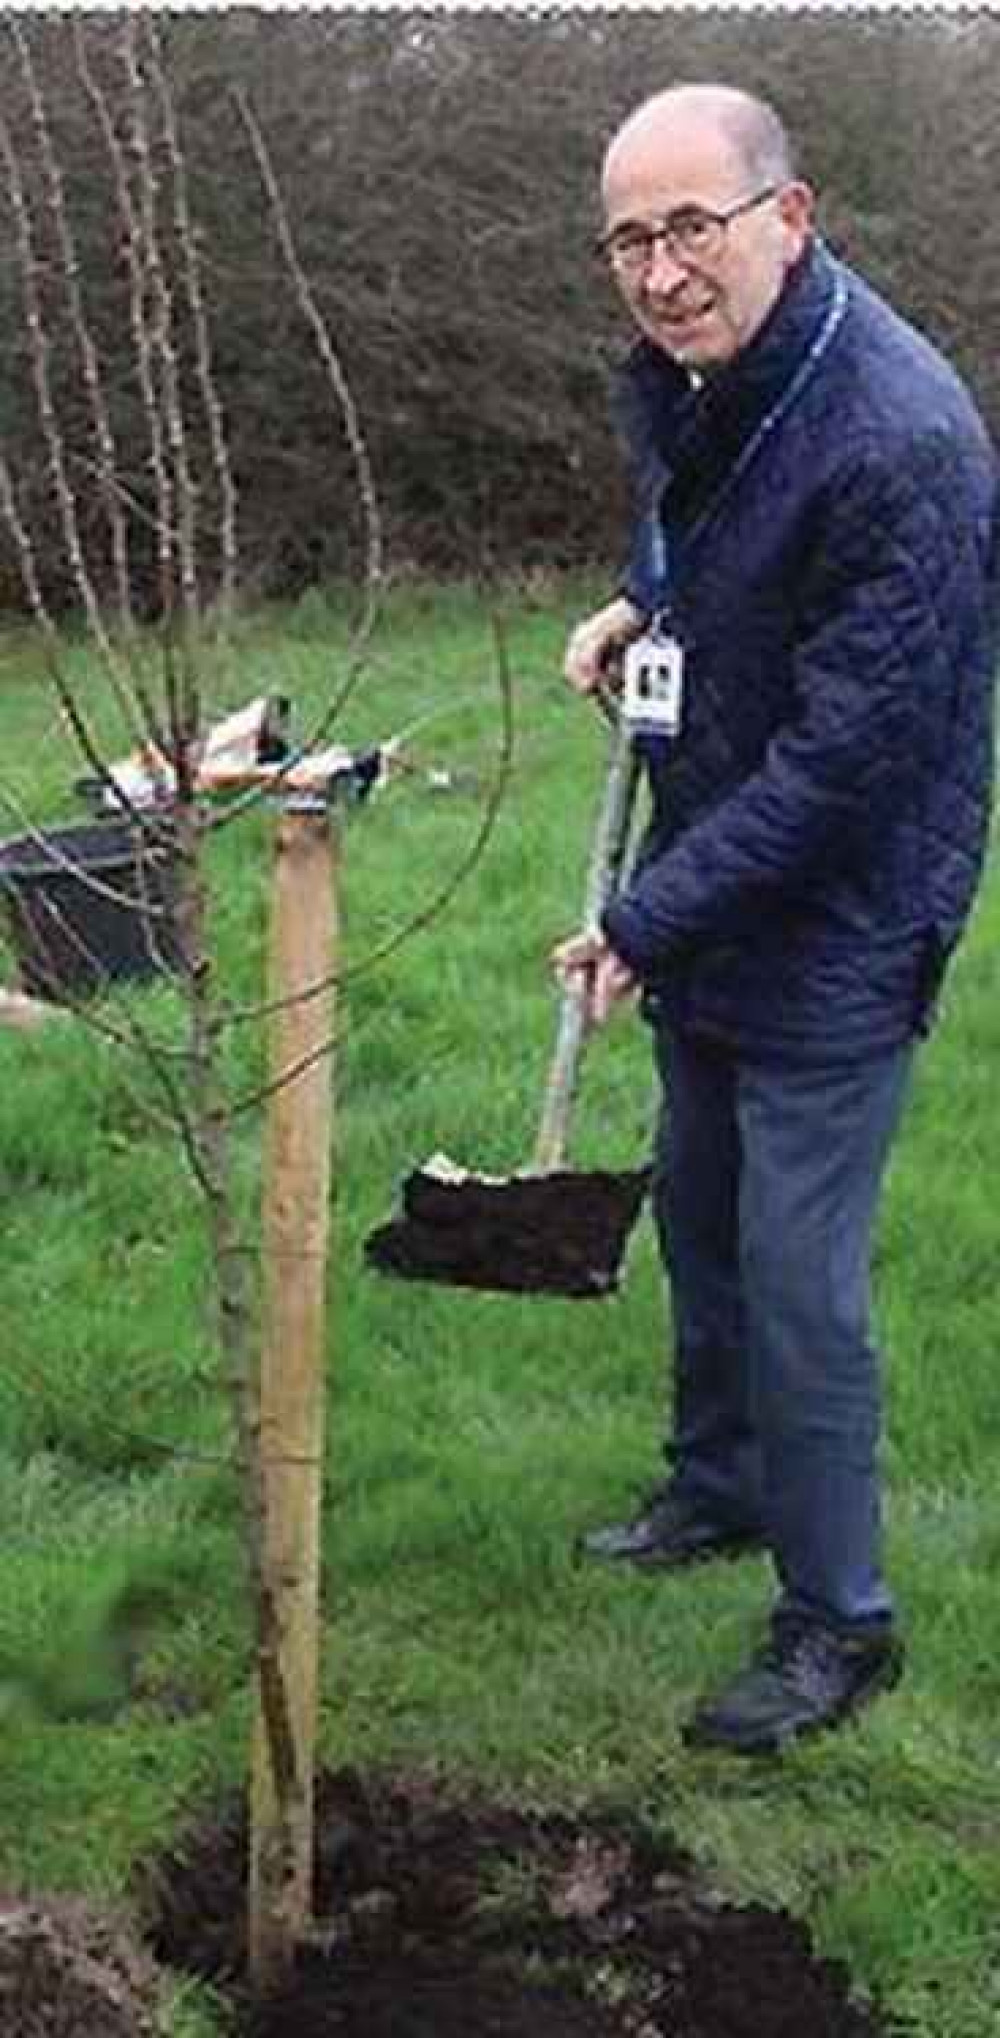 Cllr David Harrison and colleagues have promised a tree-planting initiative